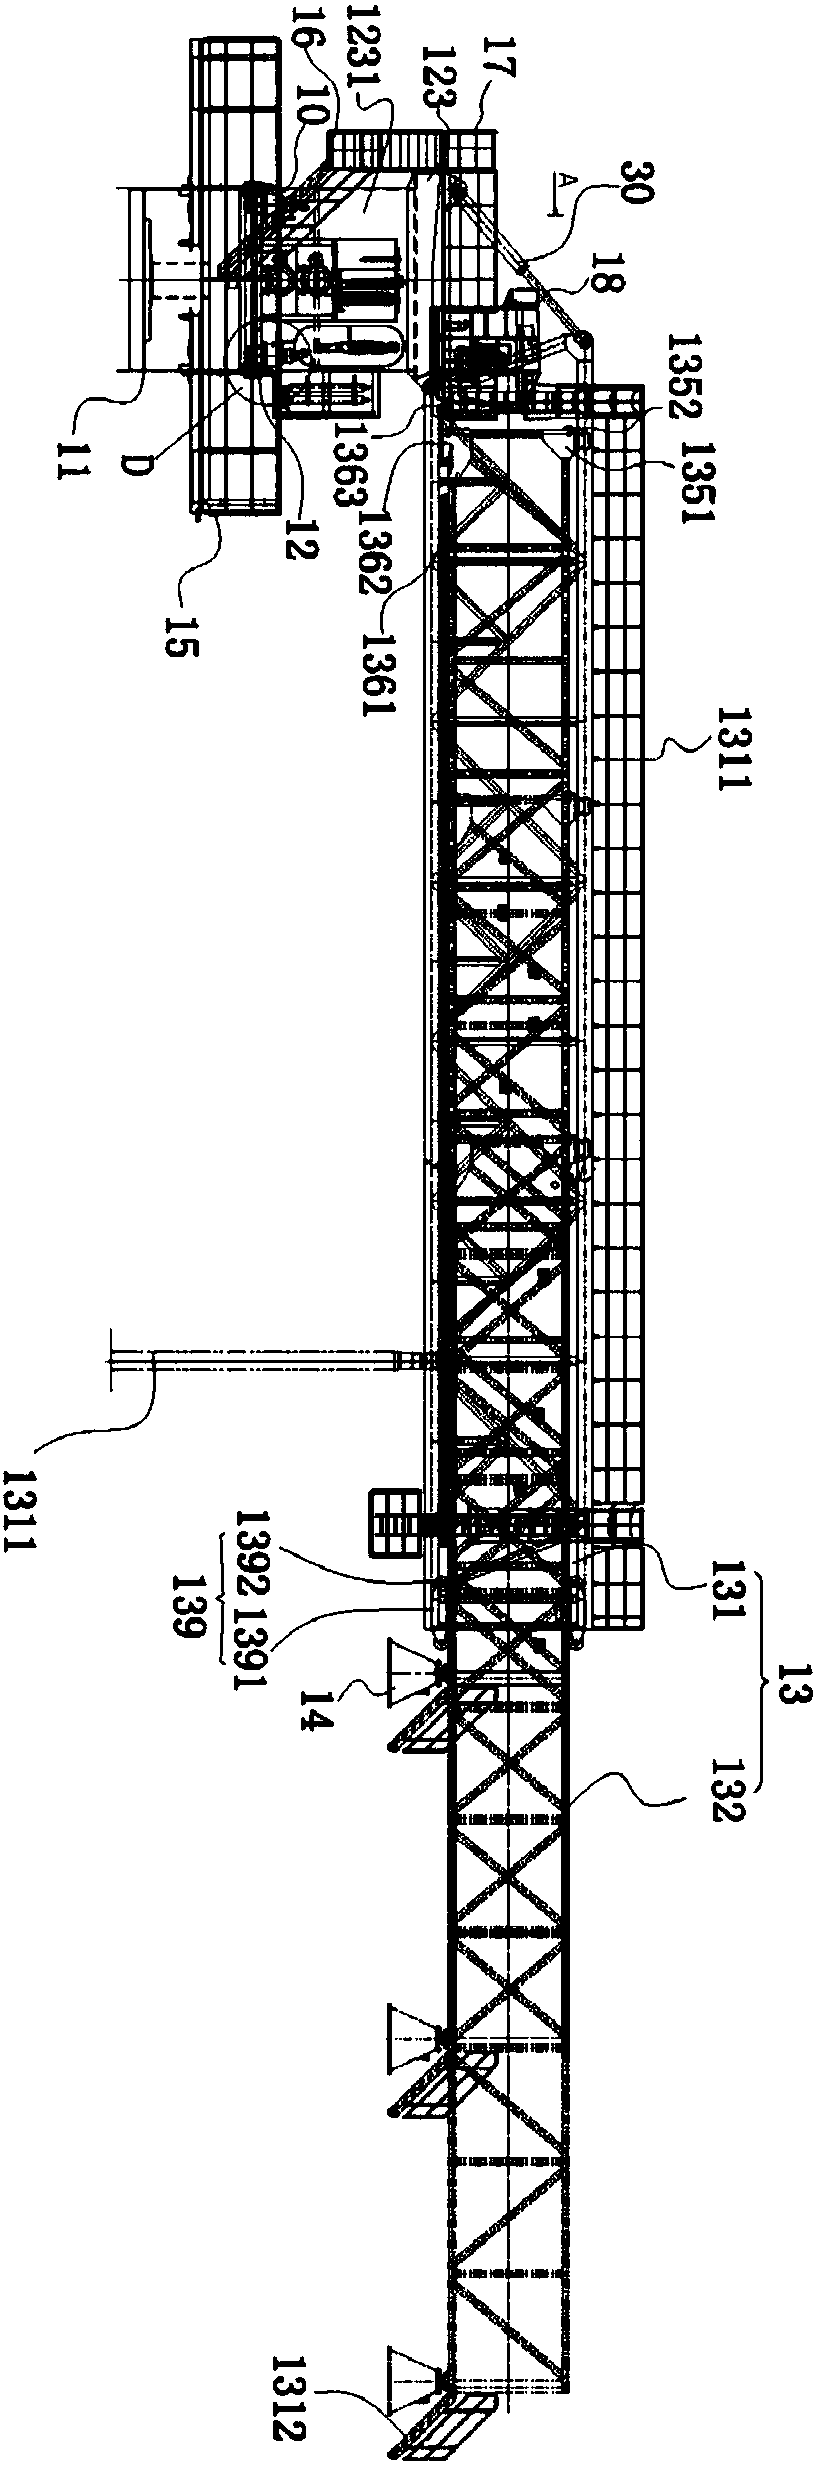 Position compensation extendable-and-retractable type boarding trestle hydraulic system